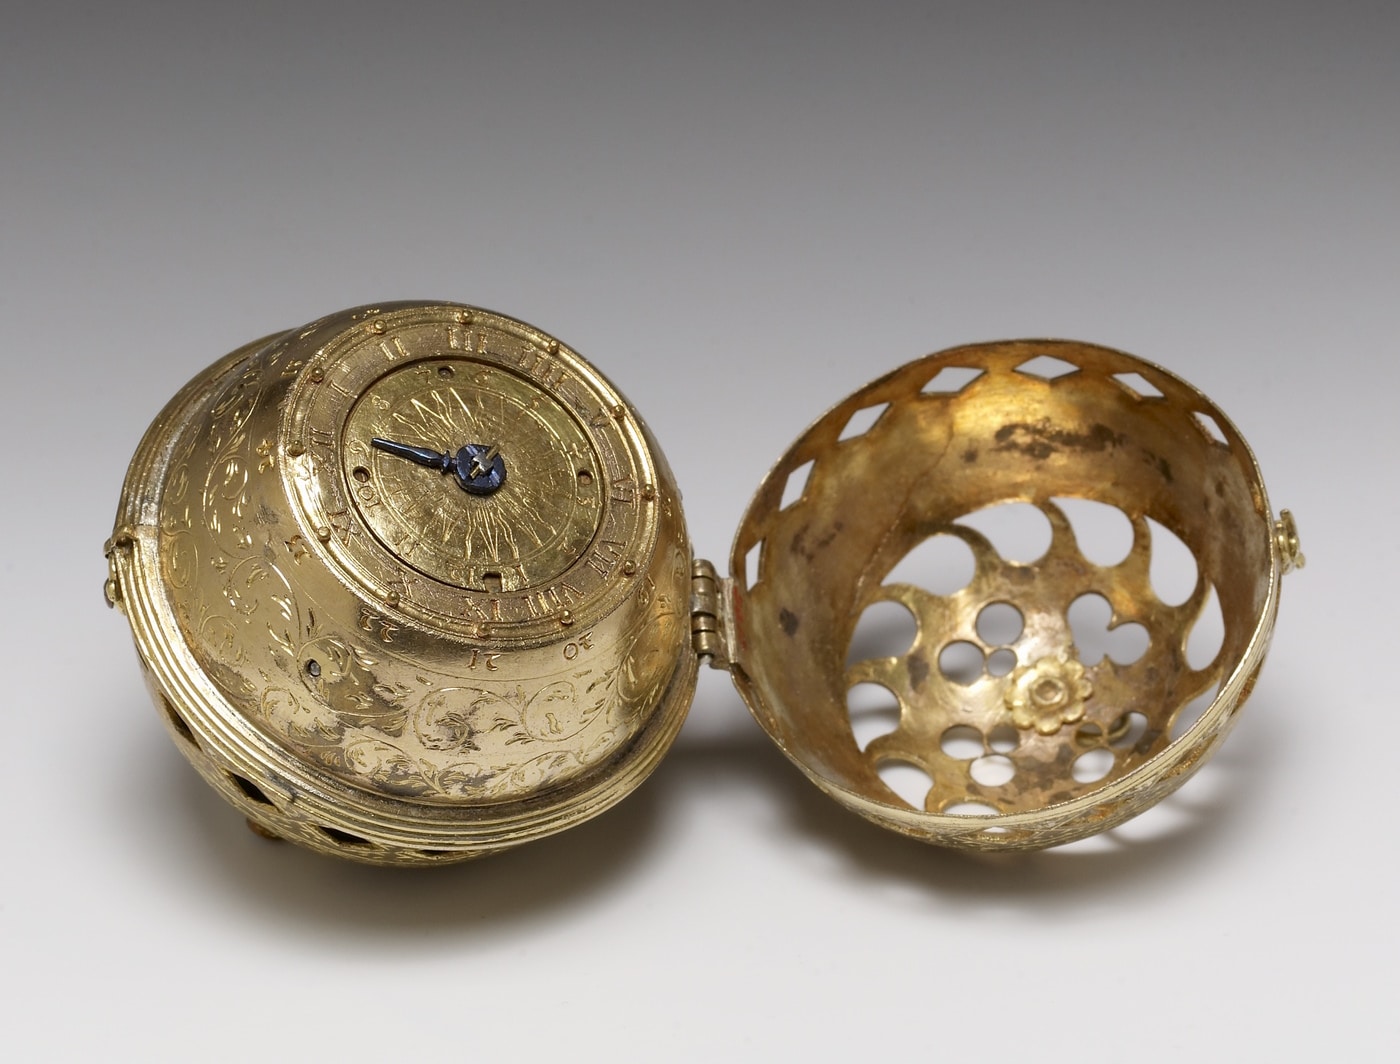 Spherical Table Watch